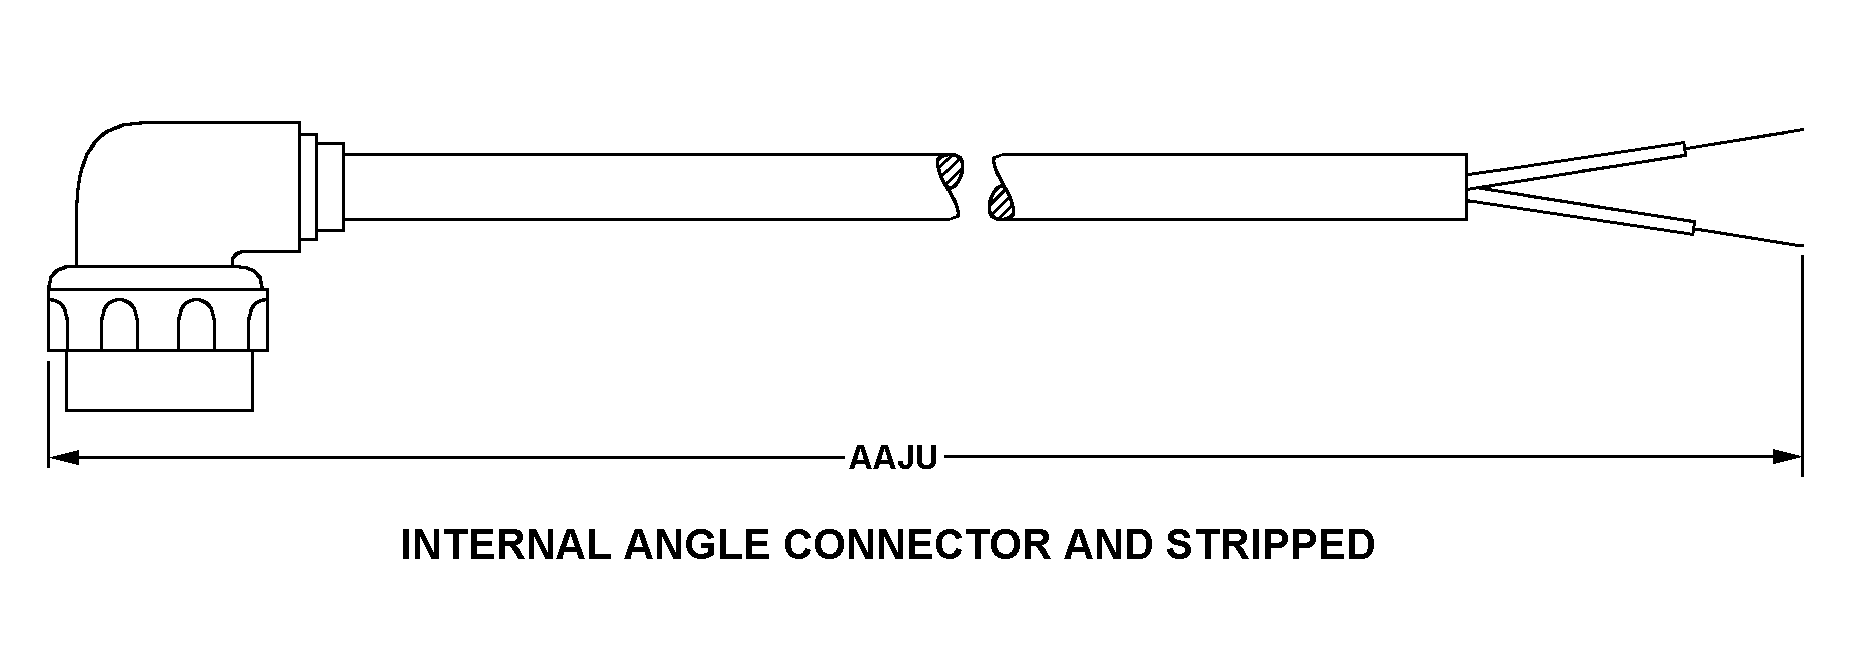 INTERNAL ANGLE CONNECTOR AND STRIPPED style nsn 5995-01-324-3445